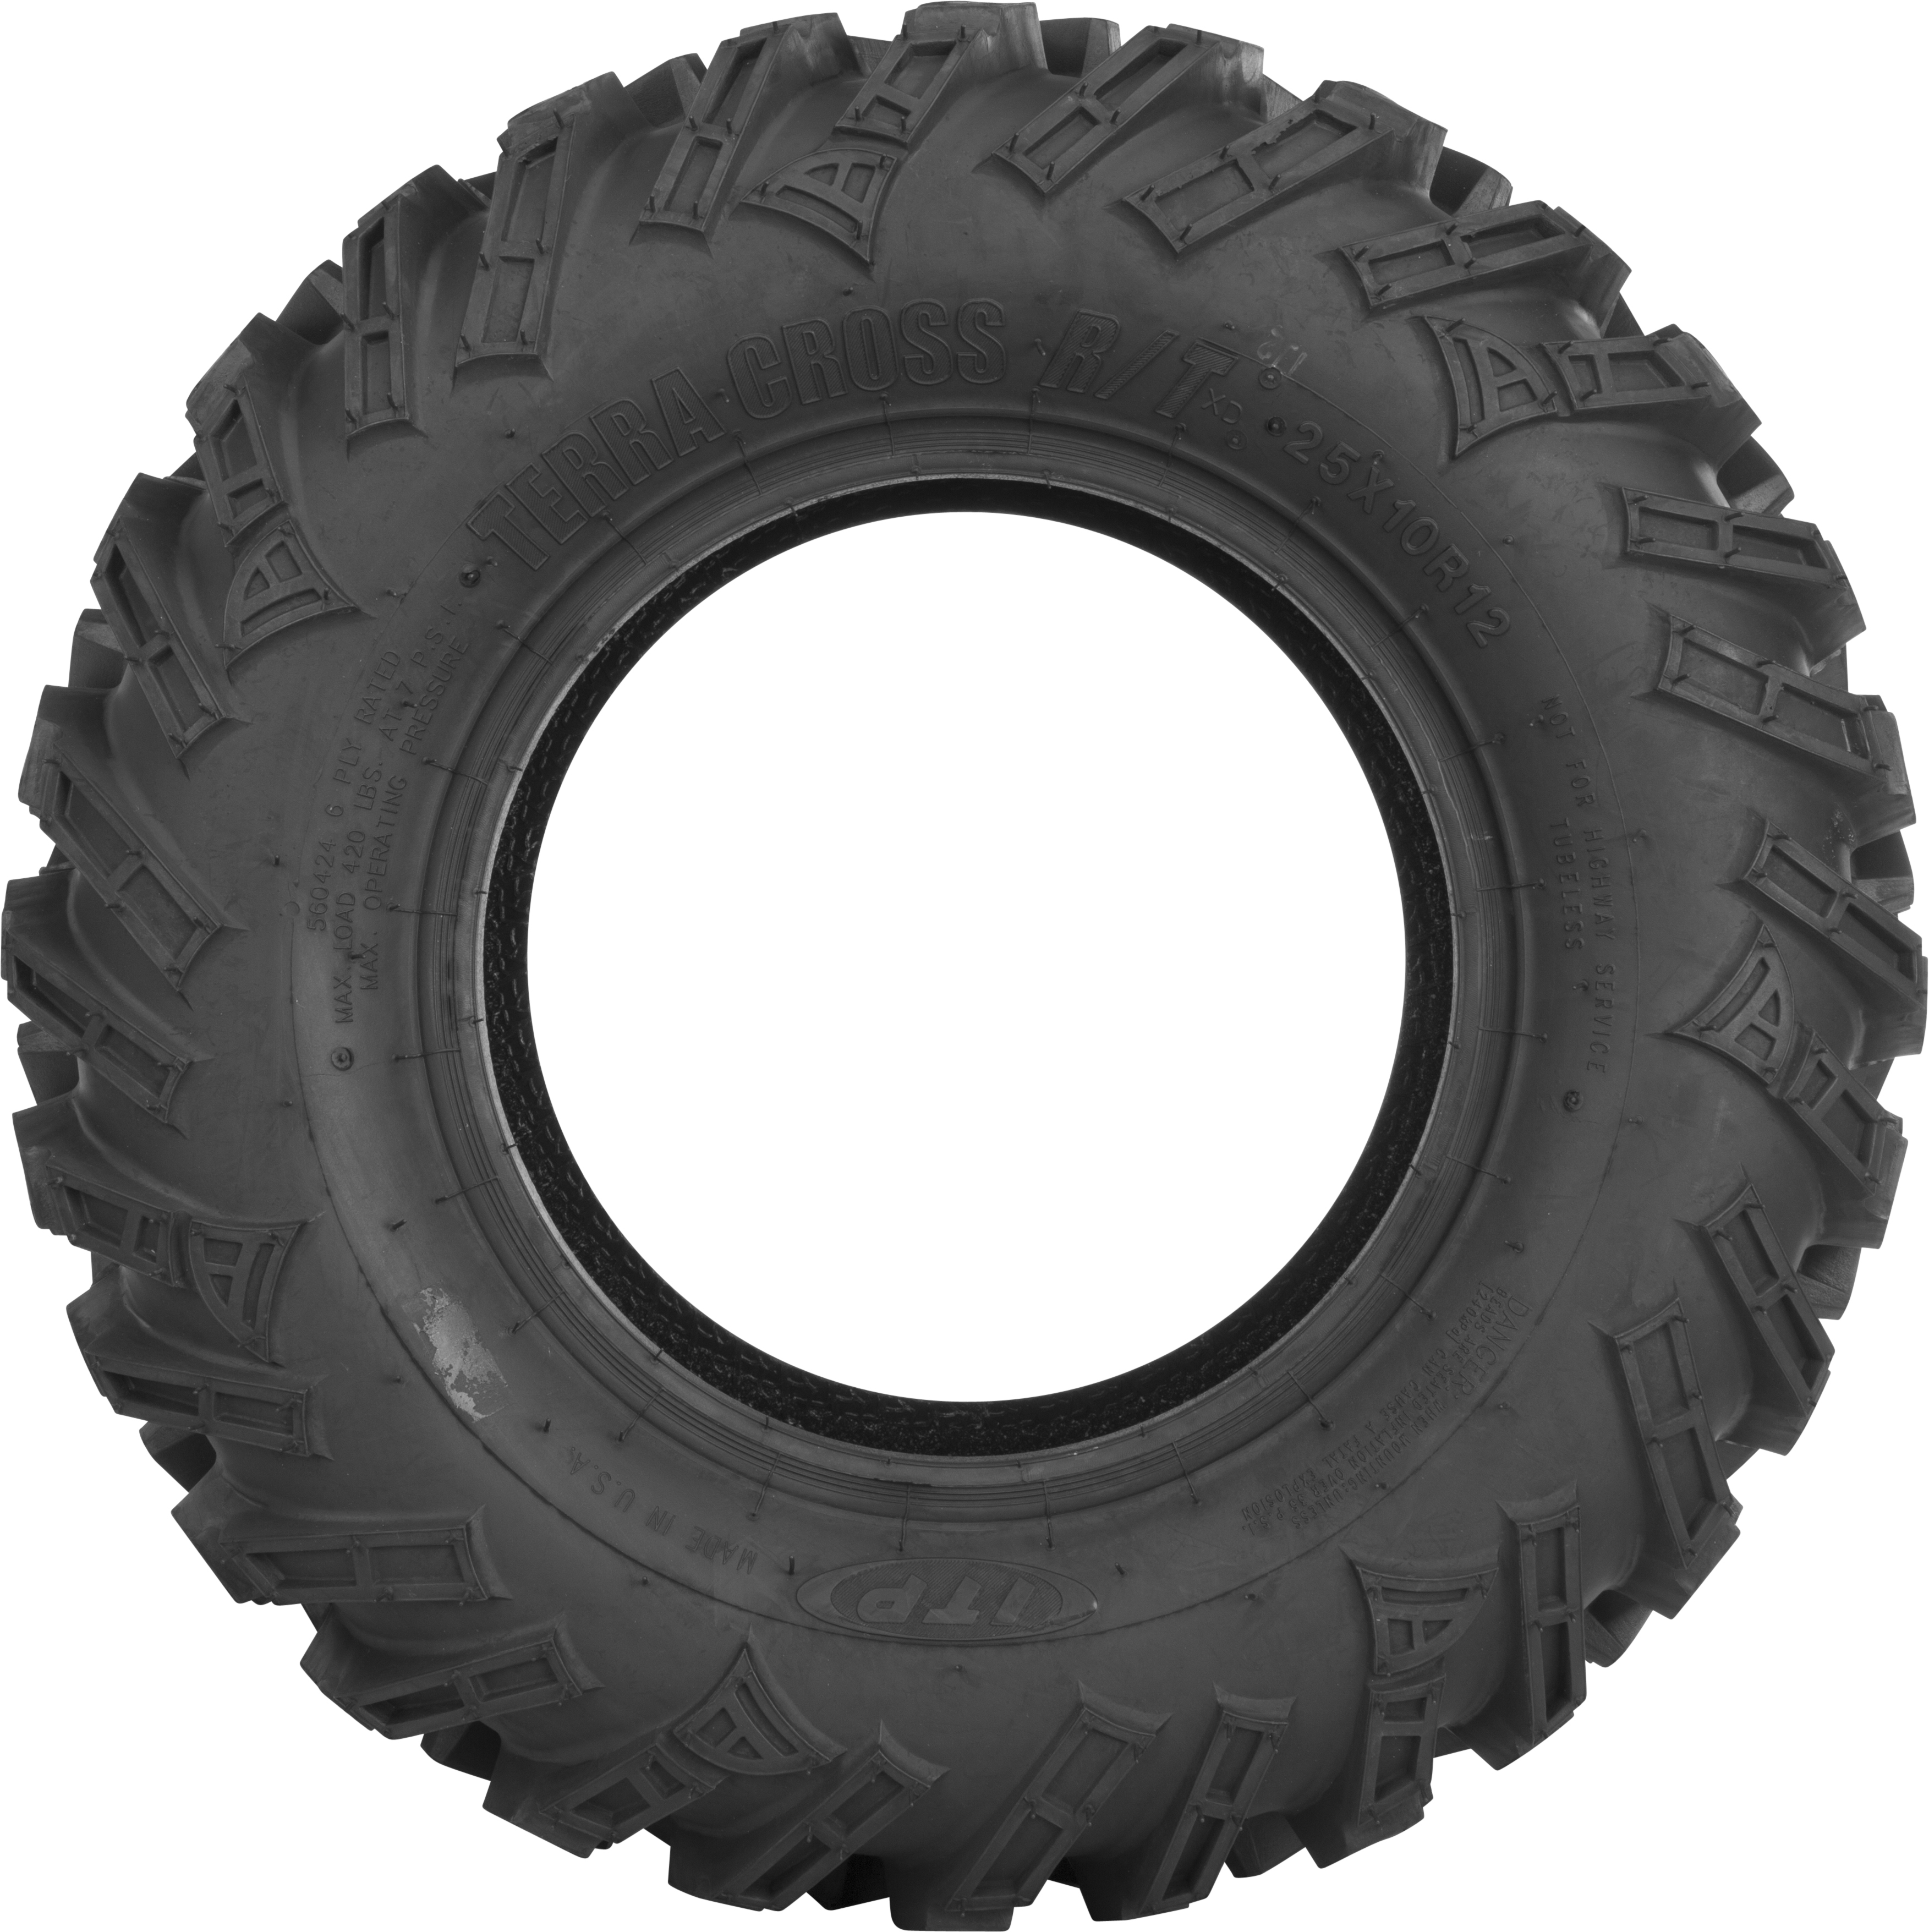 TERRACROSS R/T REAR TIRE 26X11-14 6 -PLY - Click Image to Close